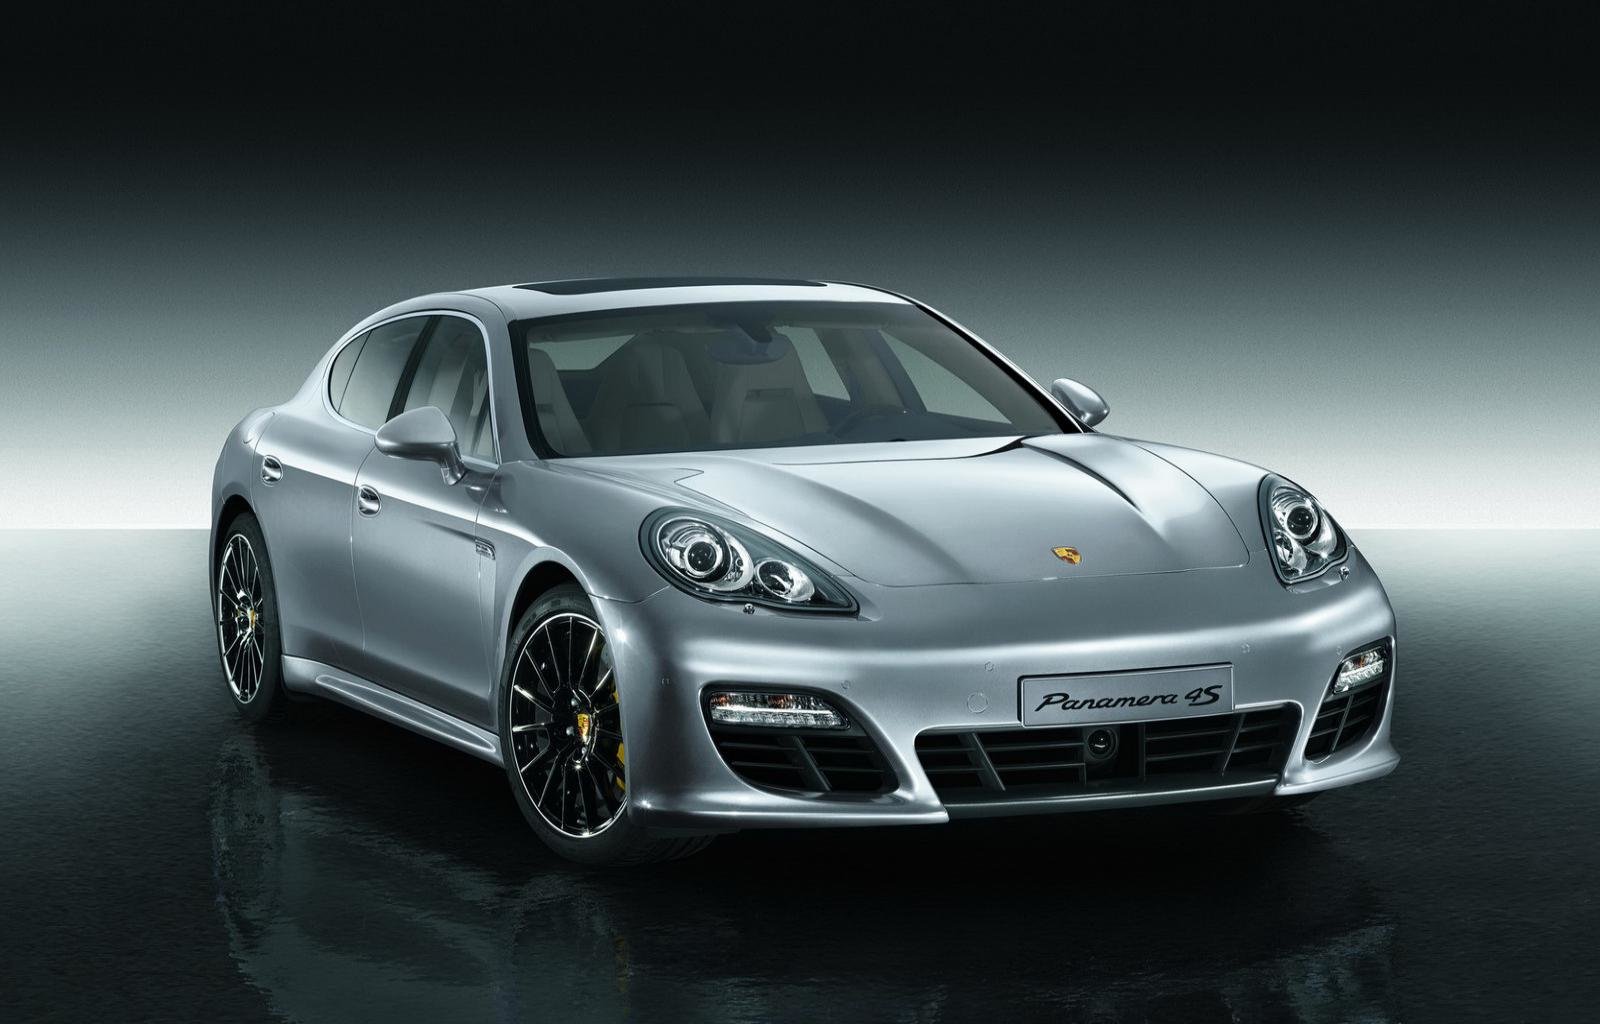 Best Panamera Turbo background ID:182843 for High Resolution hd 1600x1024 computer